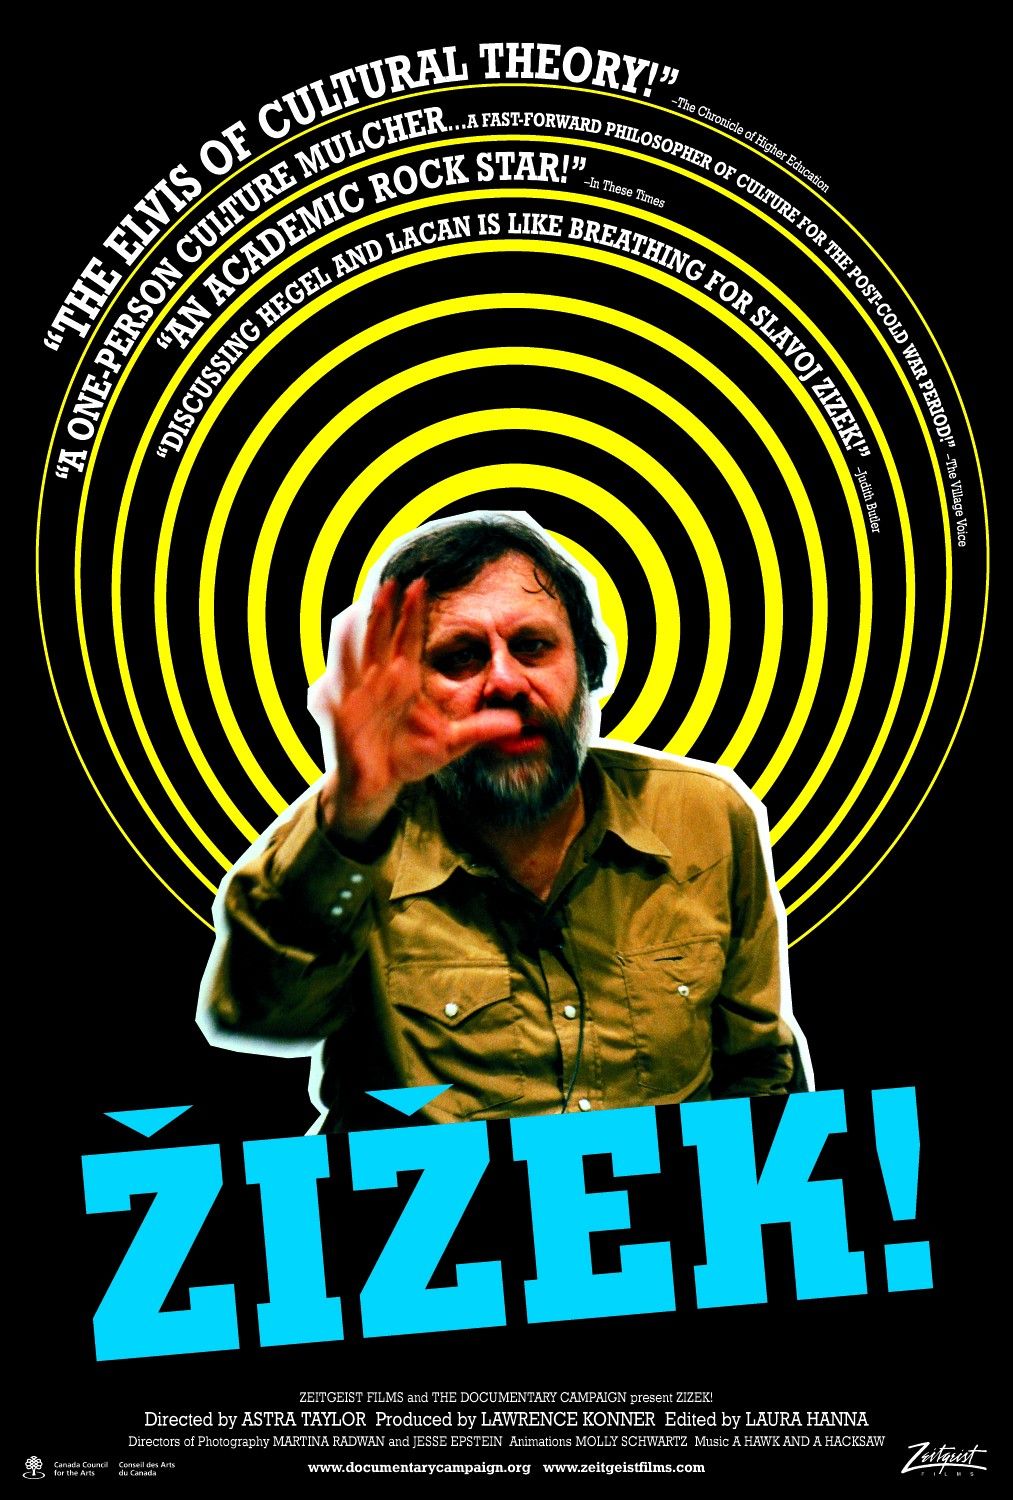 Extra Large Movie Poster Image for Zizek! 